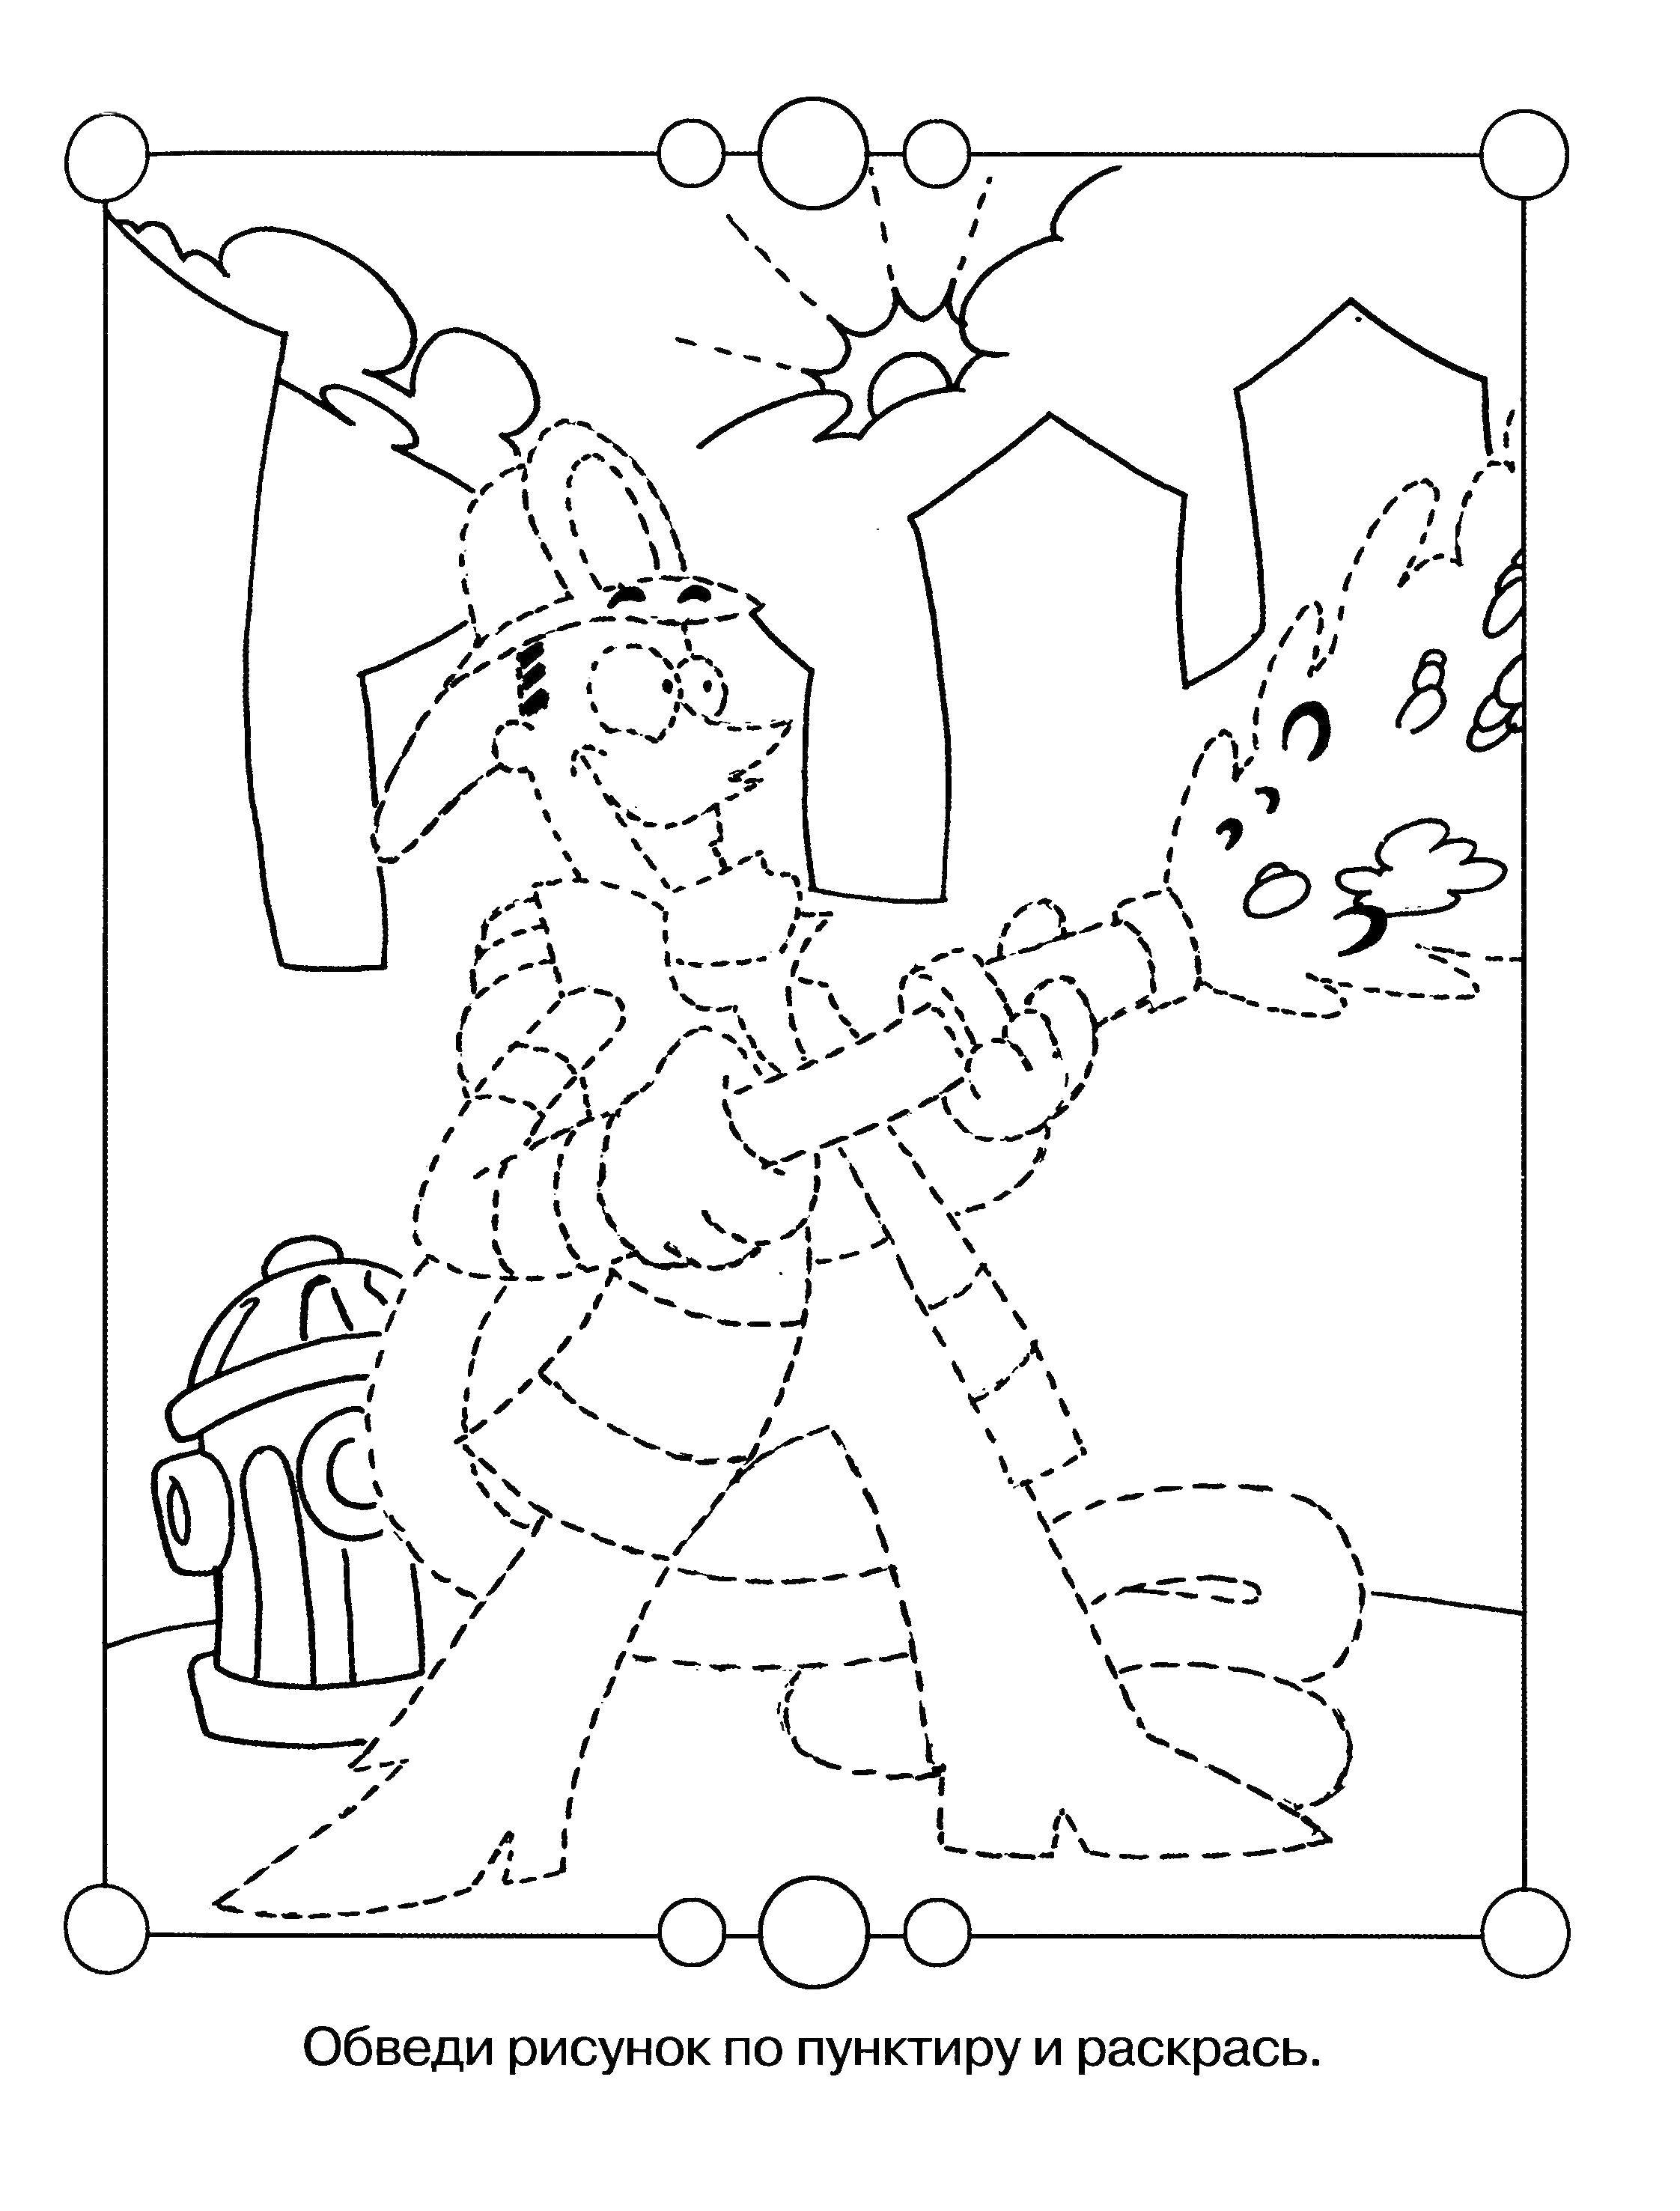 Coloring Circle on the dotted line and paint. Category riddles for kids. Tags:  Pattern , stroke path, point.